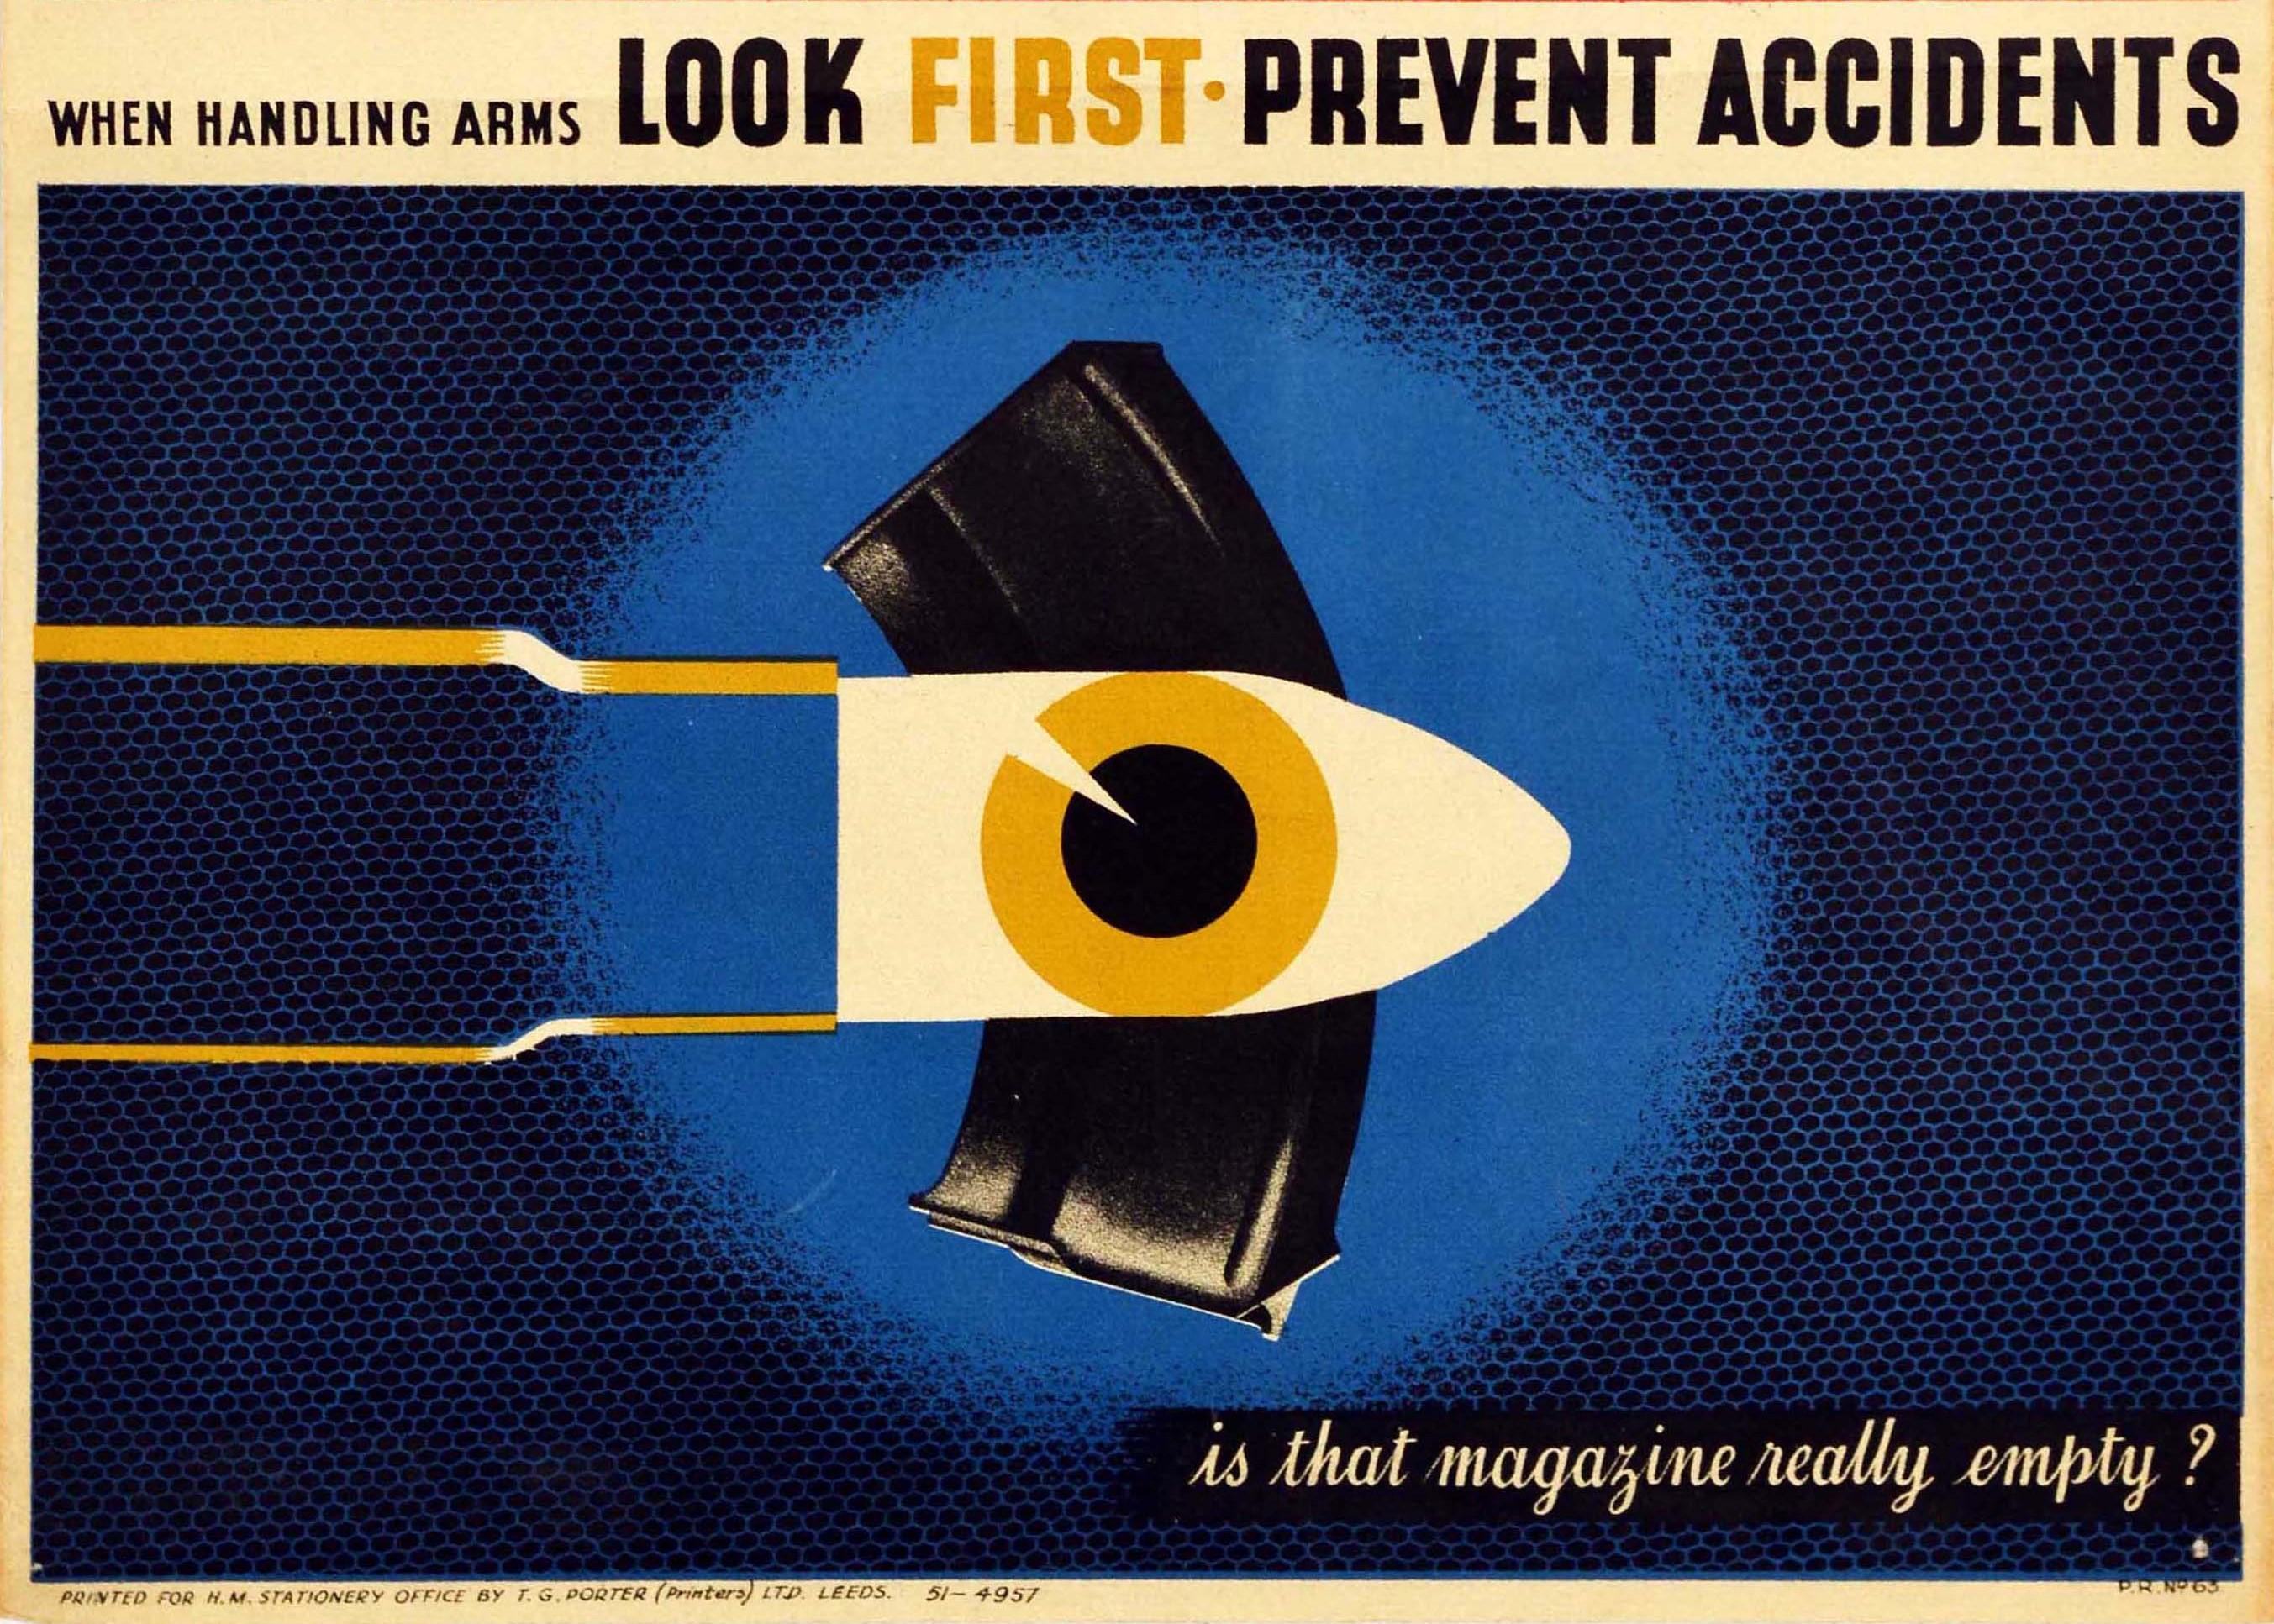 British Original Vintage WWII Poster Look First Prevent Accidents Bullets Graphic Design For Sale